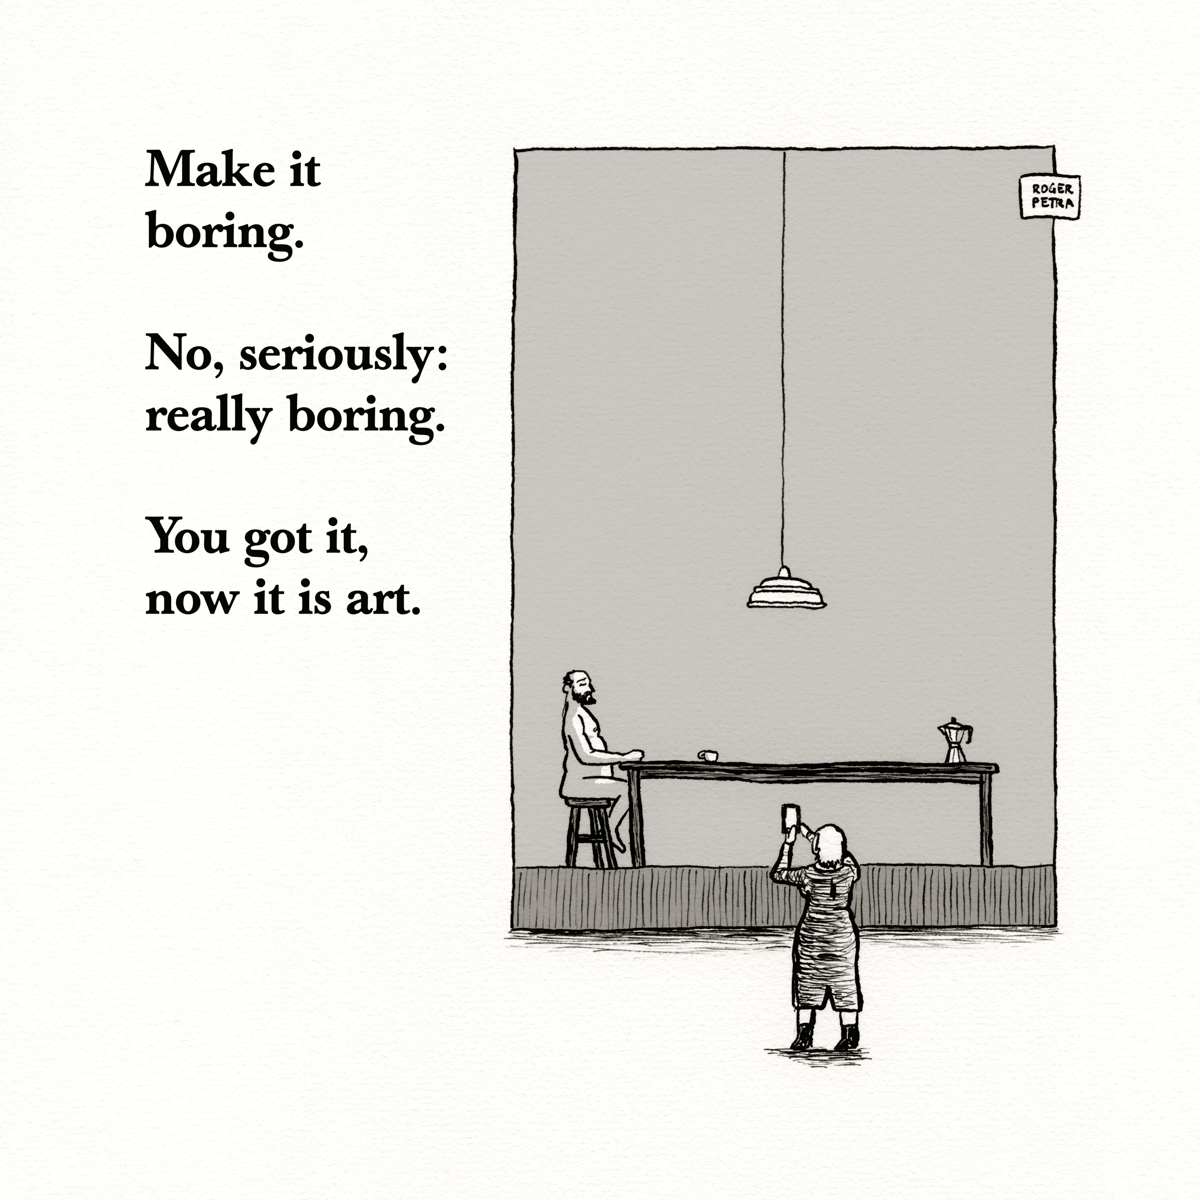 Make it boring. No, seriously: really boring. You got it, now it is art.